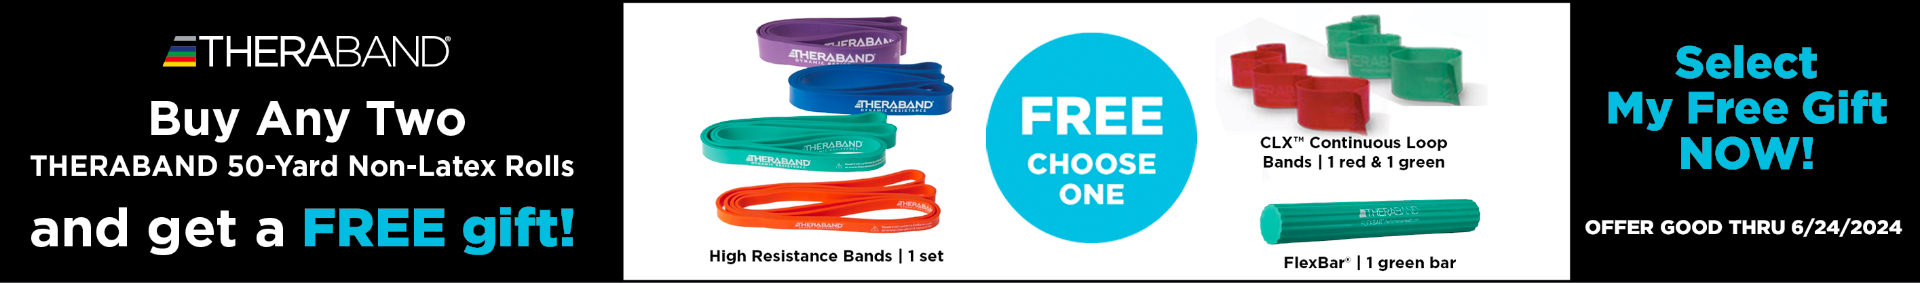 Your THERABAND Promotion